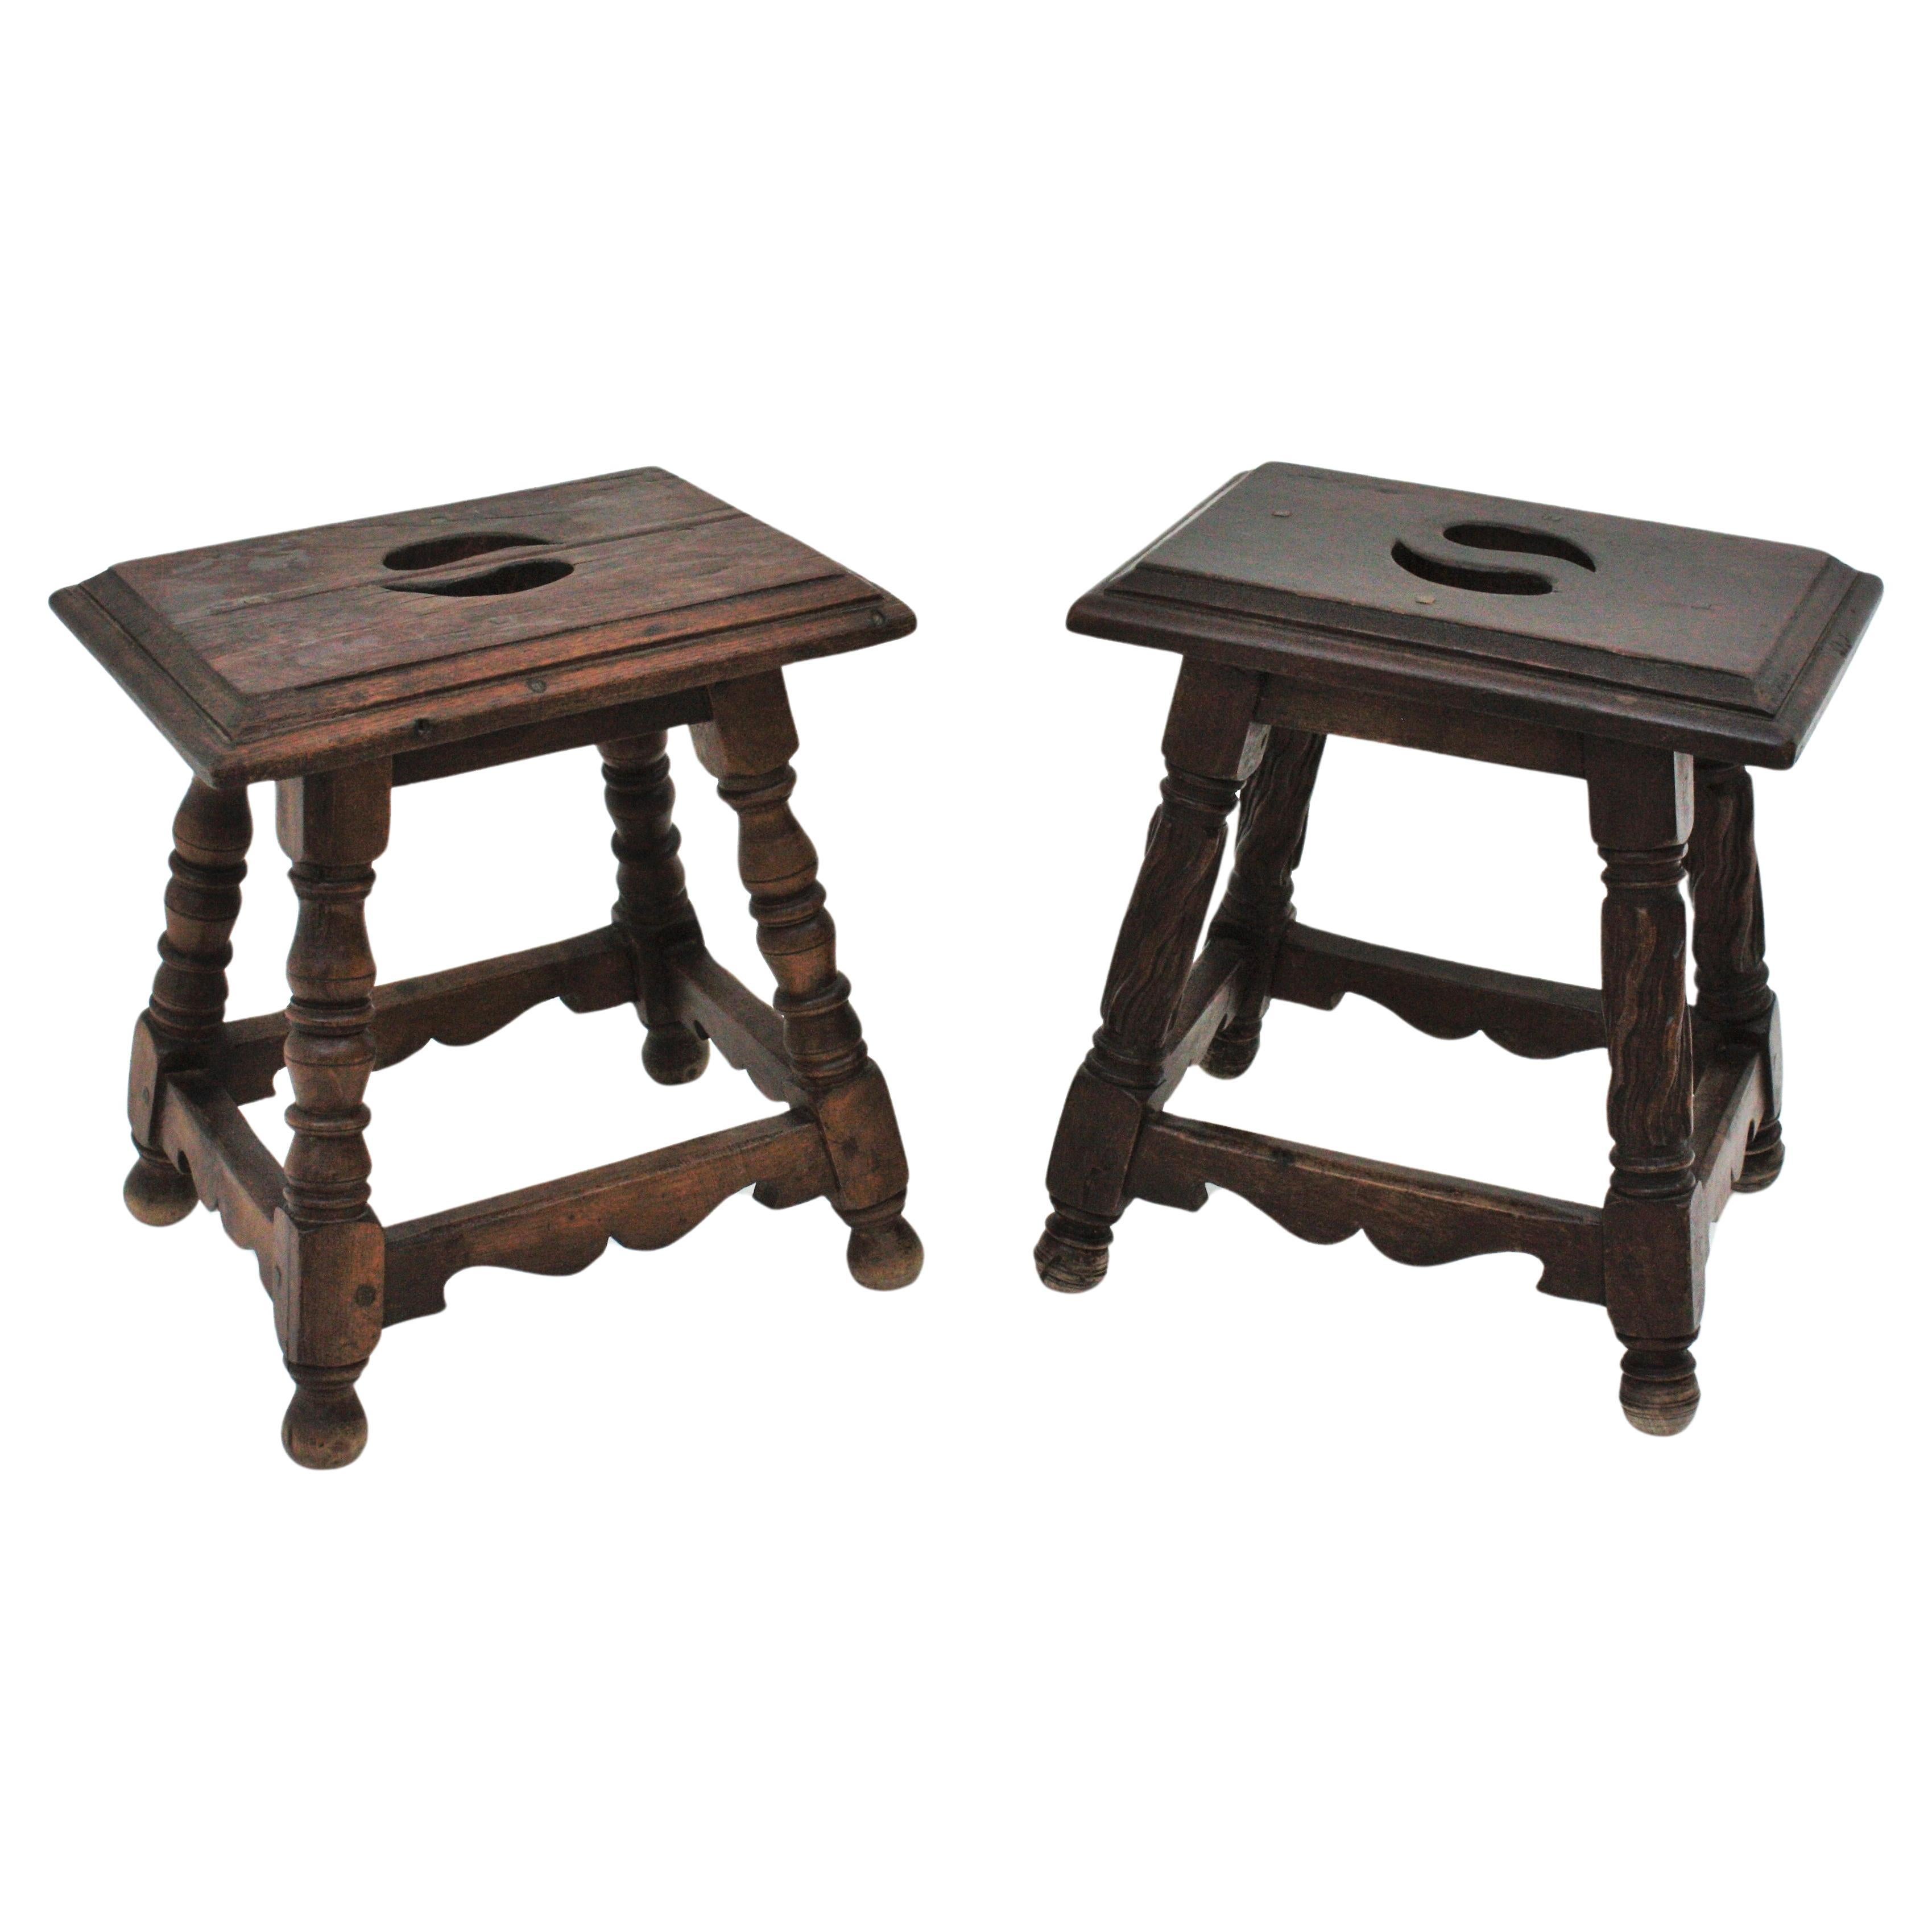 Pair of Spanish Colonial Side Tables / Stools in Carved Wood, 1940s For Sale